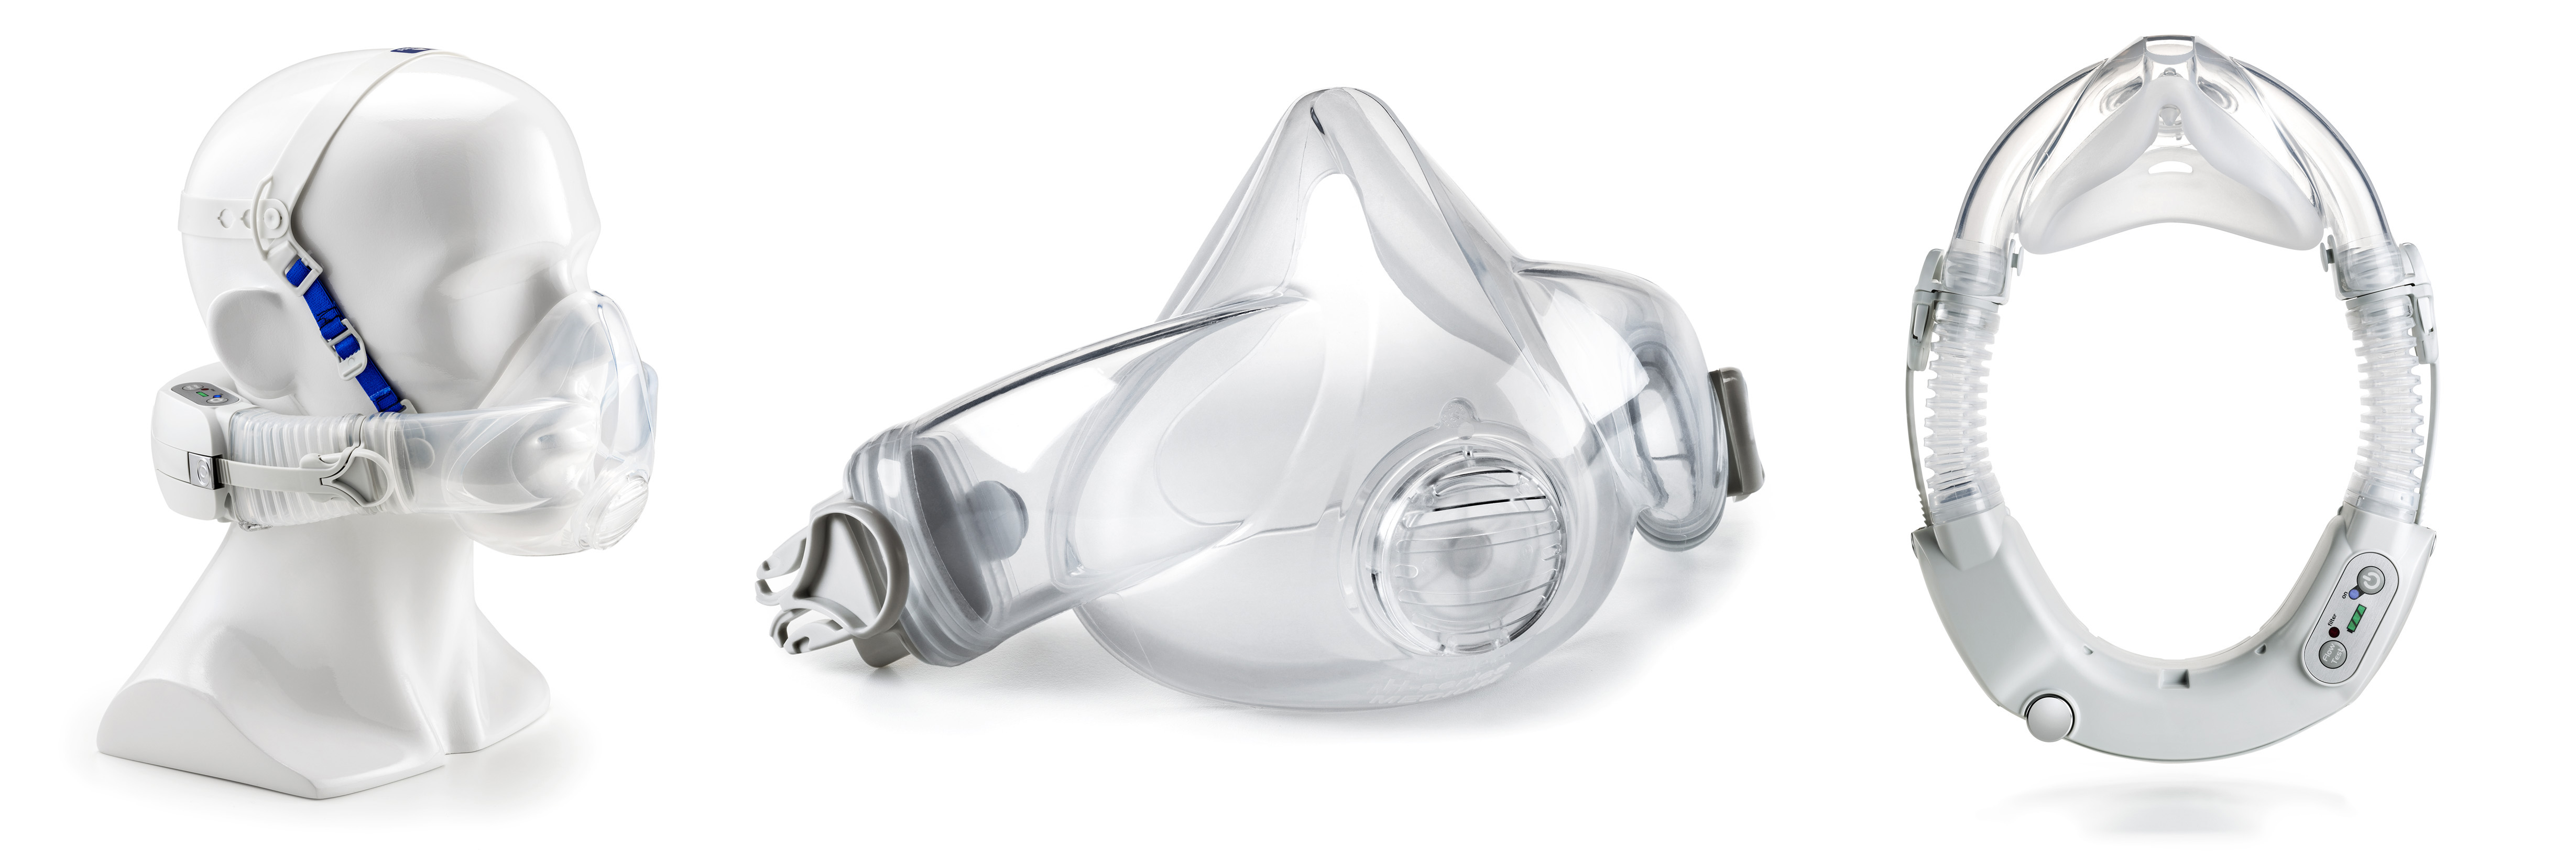 CleanSpace Halo Respirator 02